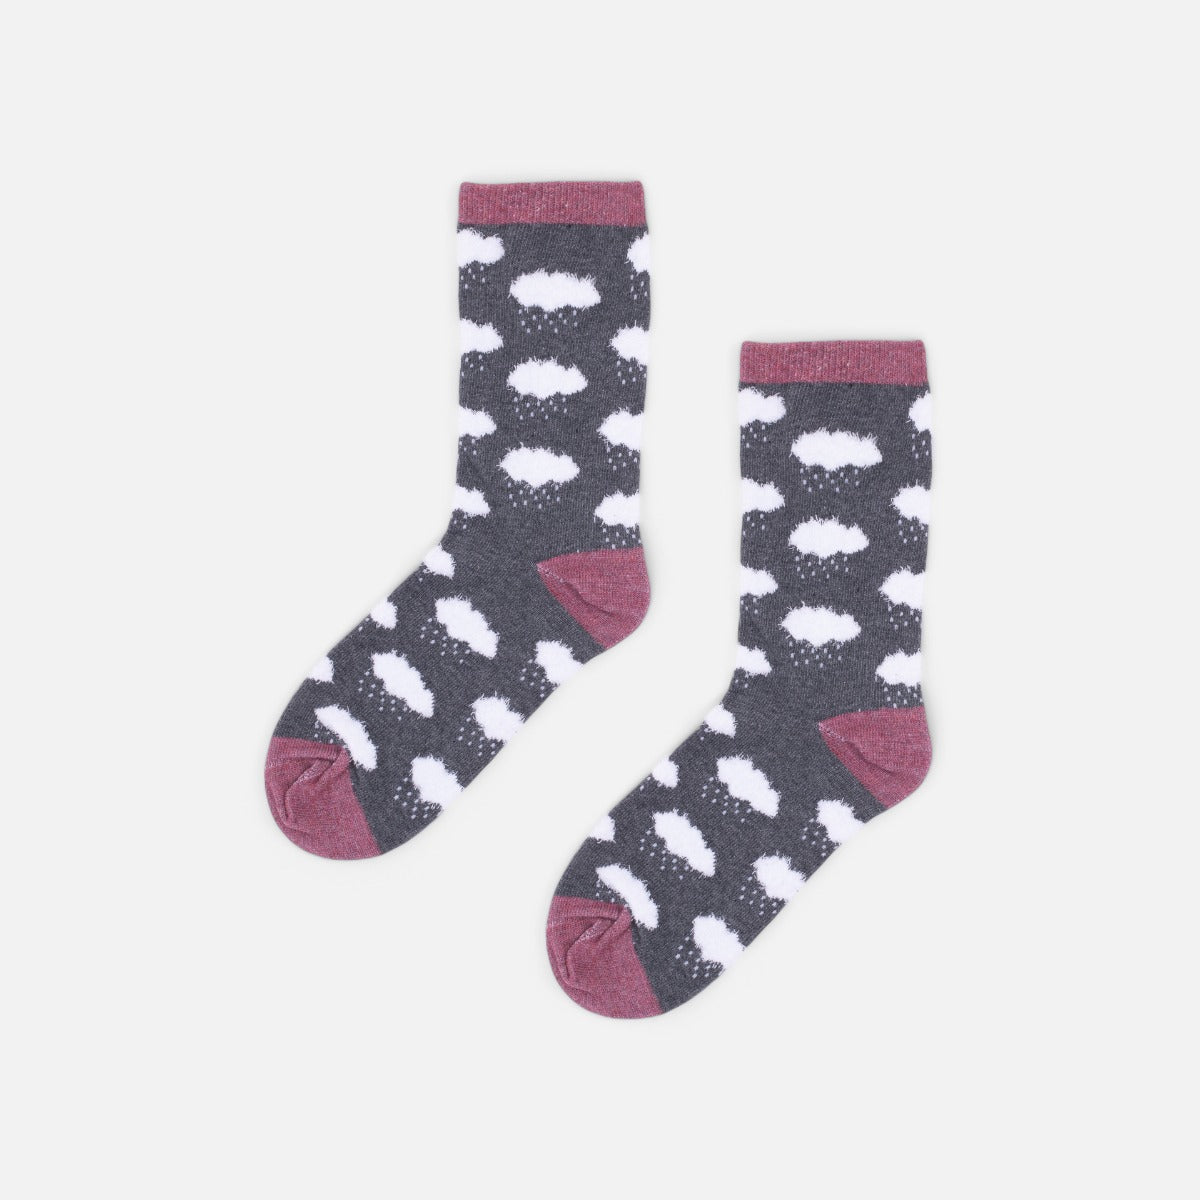 Grey and dark pink socks with white cozy clouds